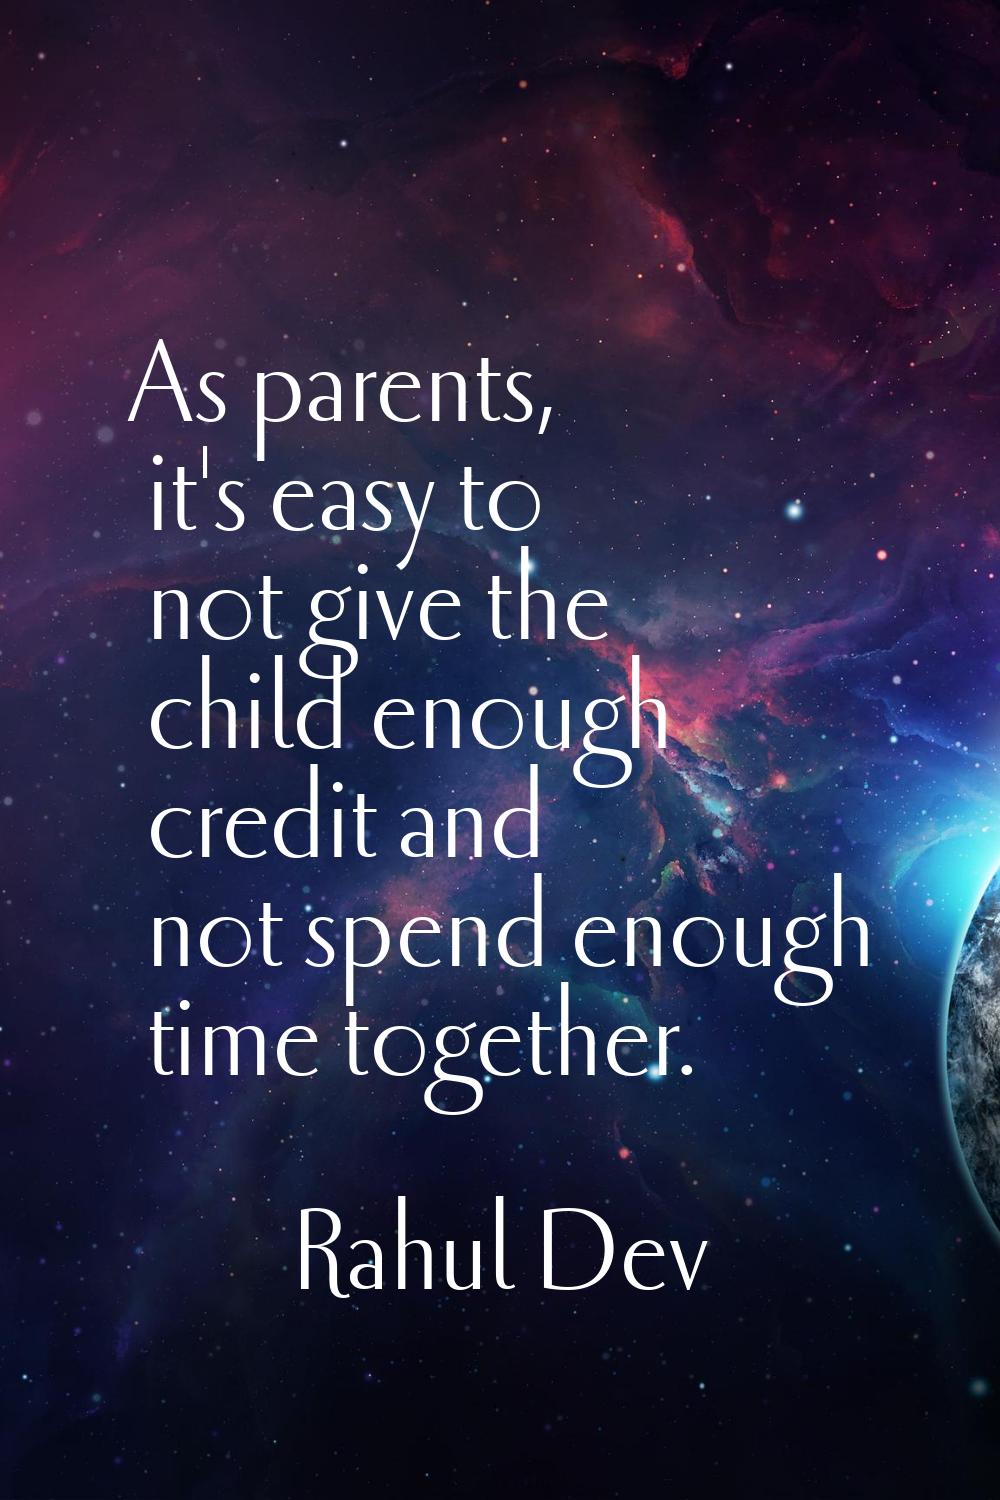 As parents, it's easy to not give the child enough credit and not spend enough time together.